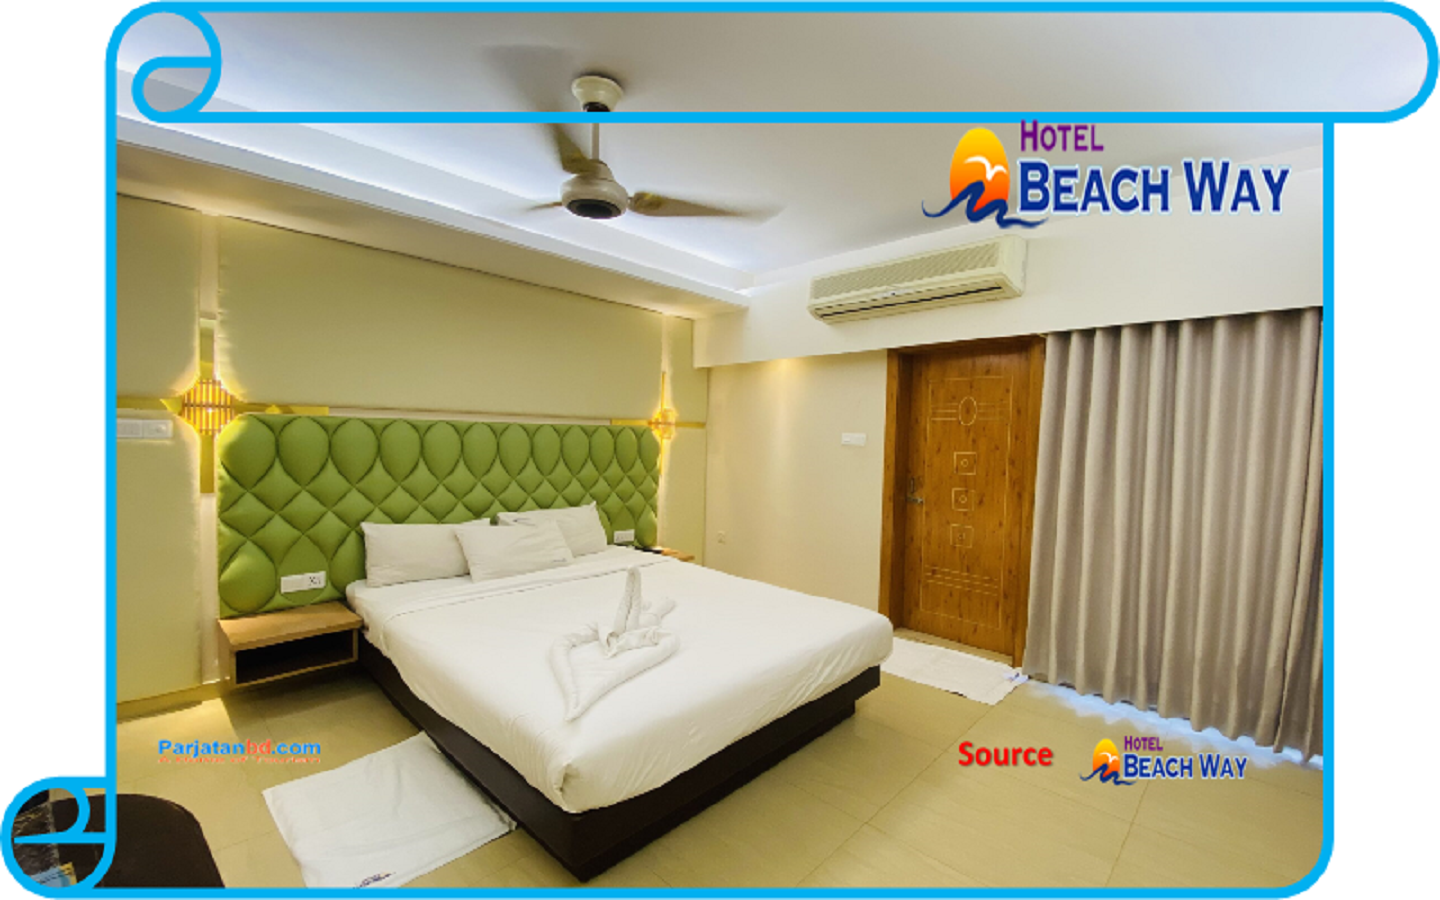 HOTEL BEACH WAY Picture-2